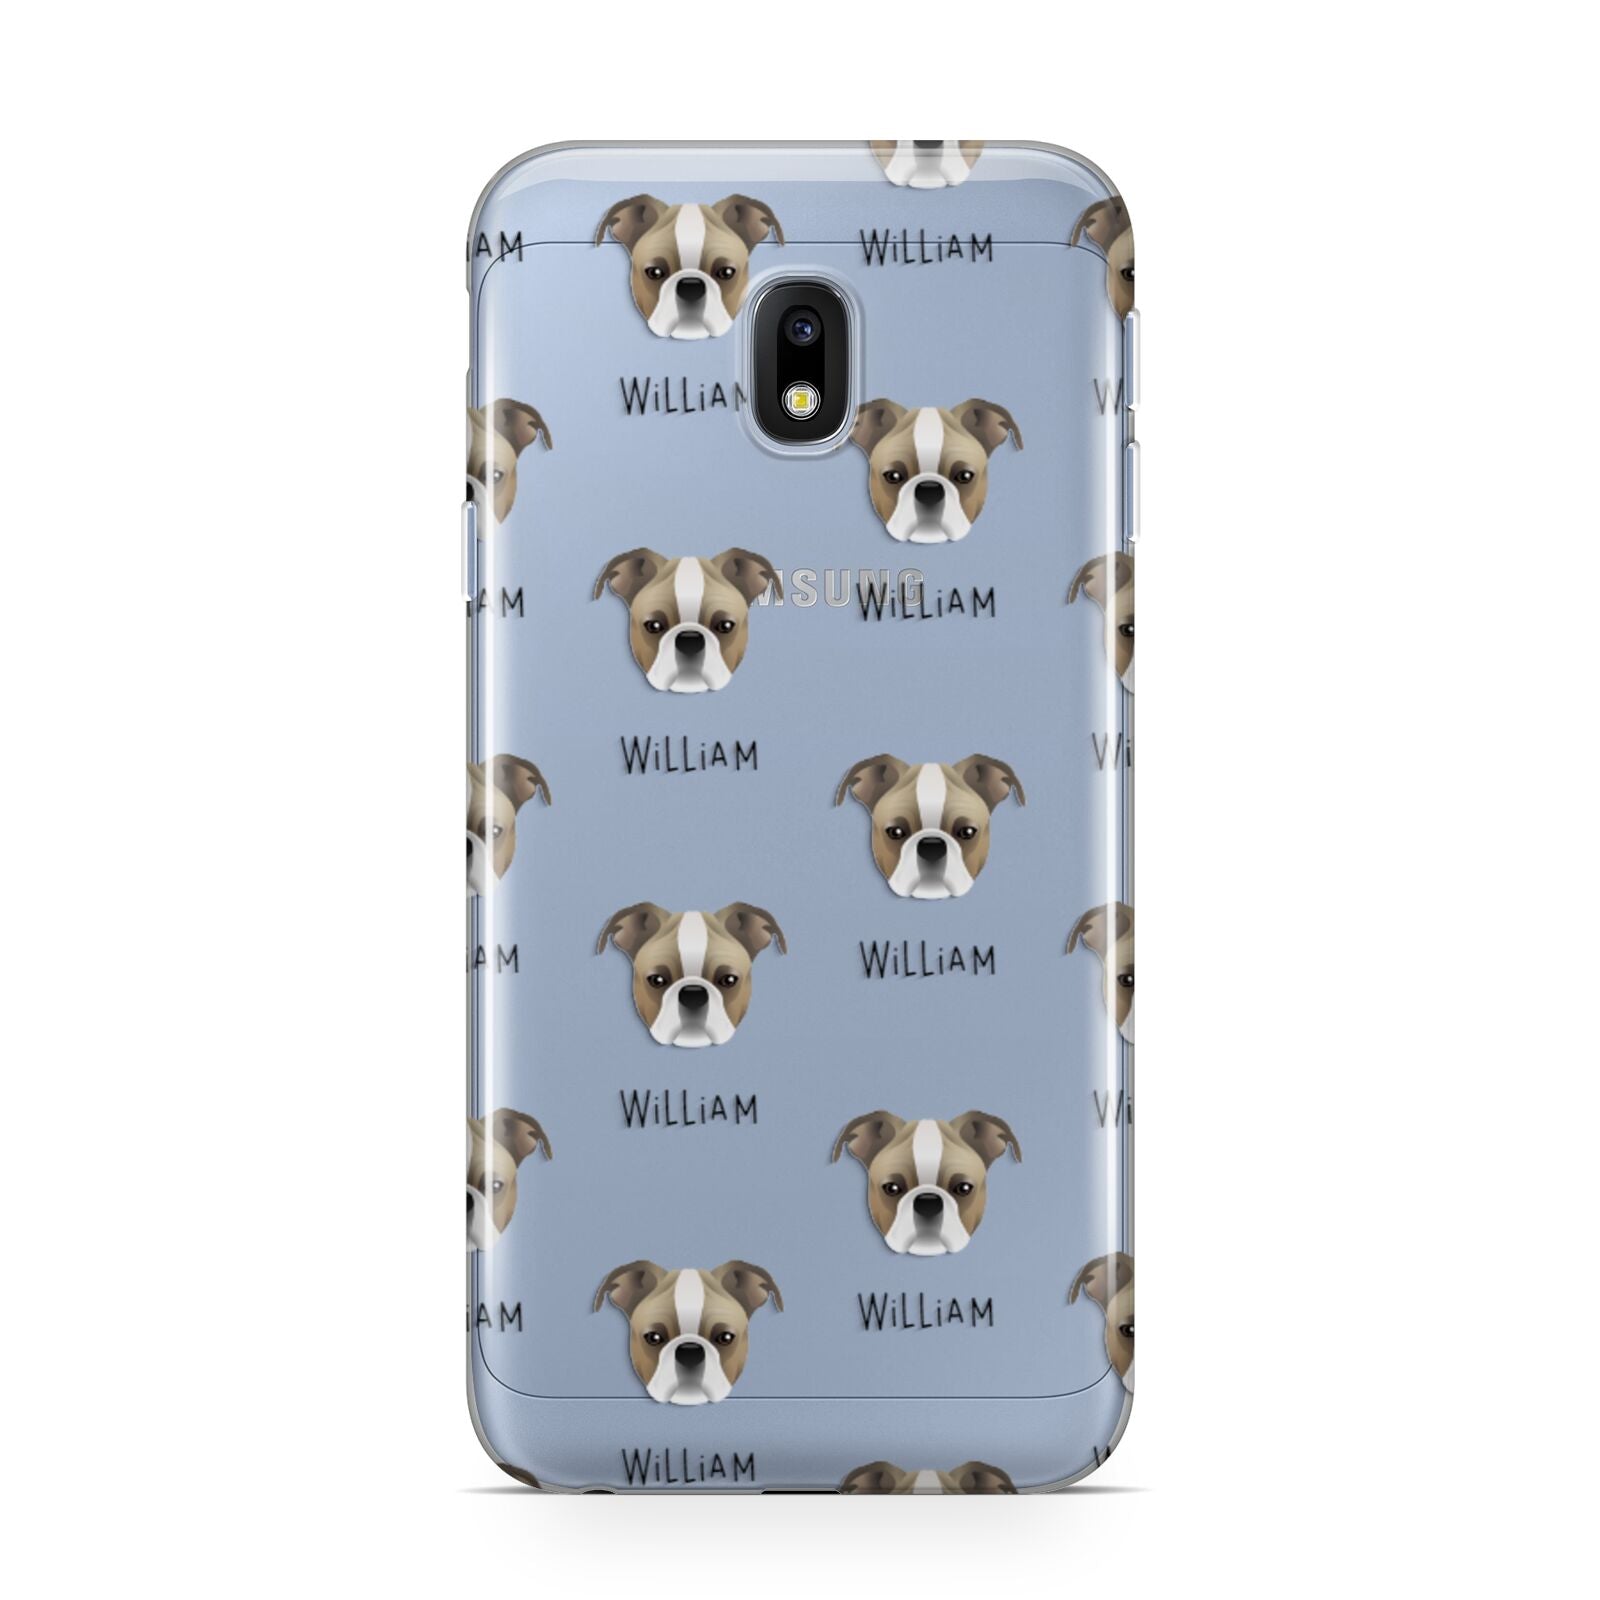 Bugg Icon with Name Samsung Galaxy J3 2017 Case